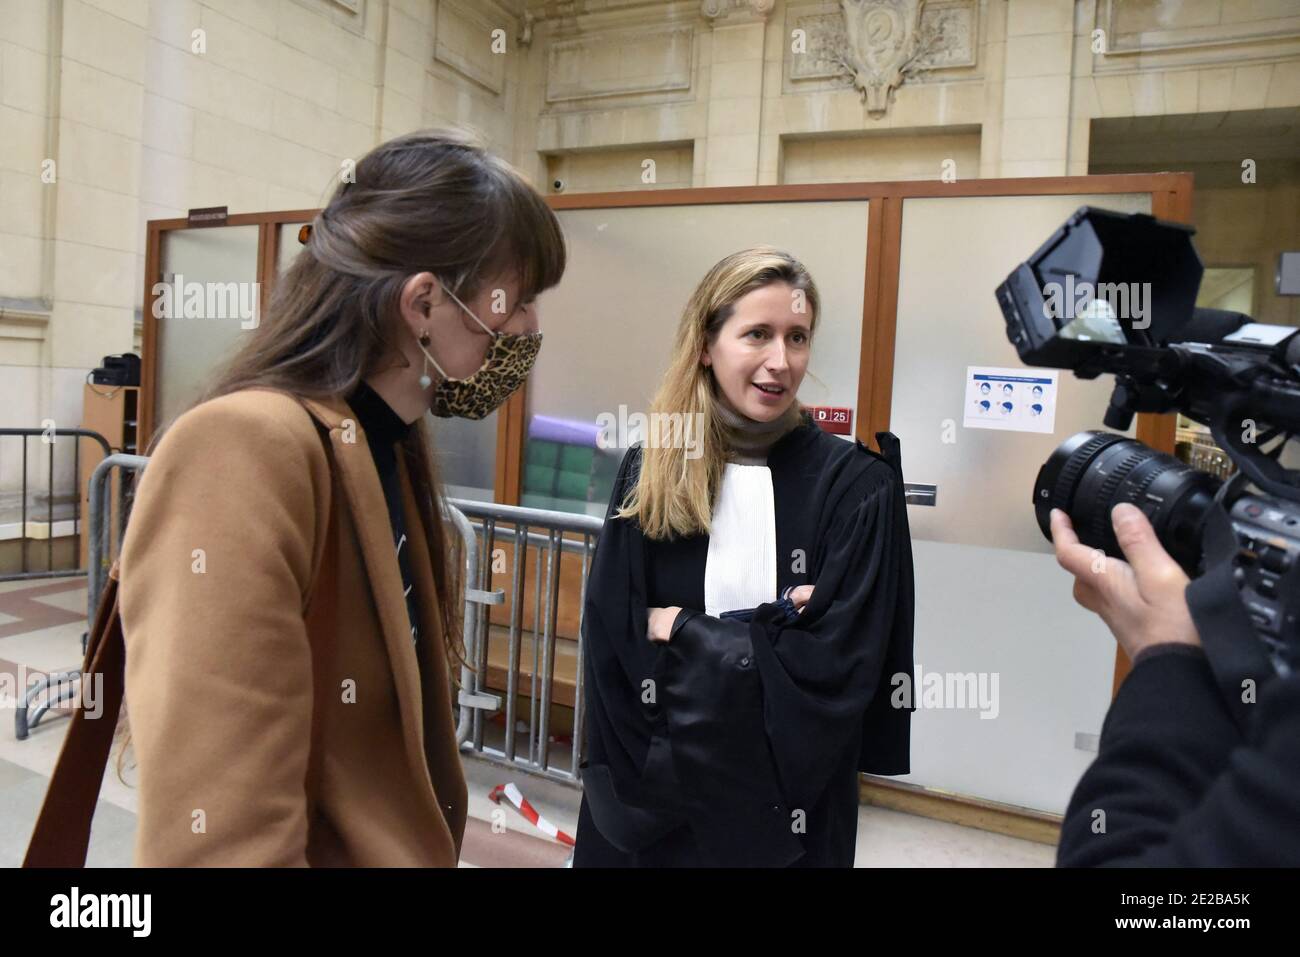 Paris, France. 13th Jan 2021. Femen member Clemence and her lawyer Louise Bouchain at the Court of Appeal during her trial for the Femen protest at the Arc de Triomphe, at the' courthouse in Paris, France, on January 13, 2021. Photo by Patrice Pierrot/Avenir Pictures/ABACAPRESS.COM Credit: Abaca Press/Alamy Live News Stock Photo